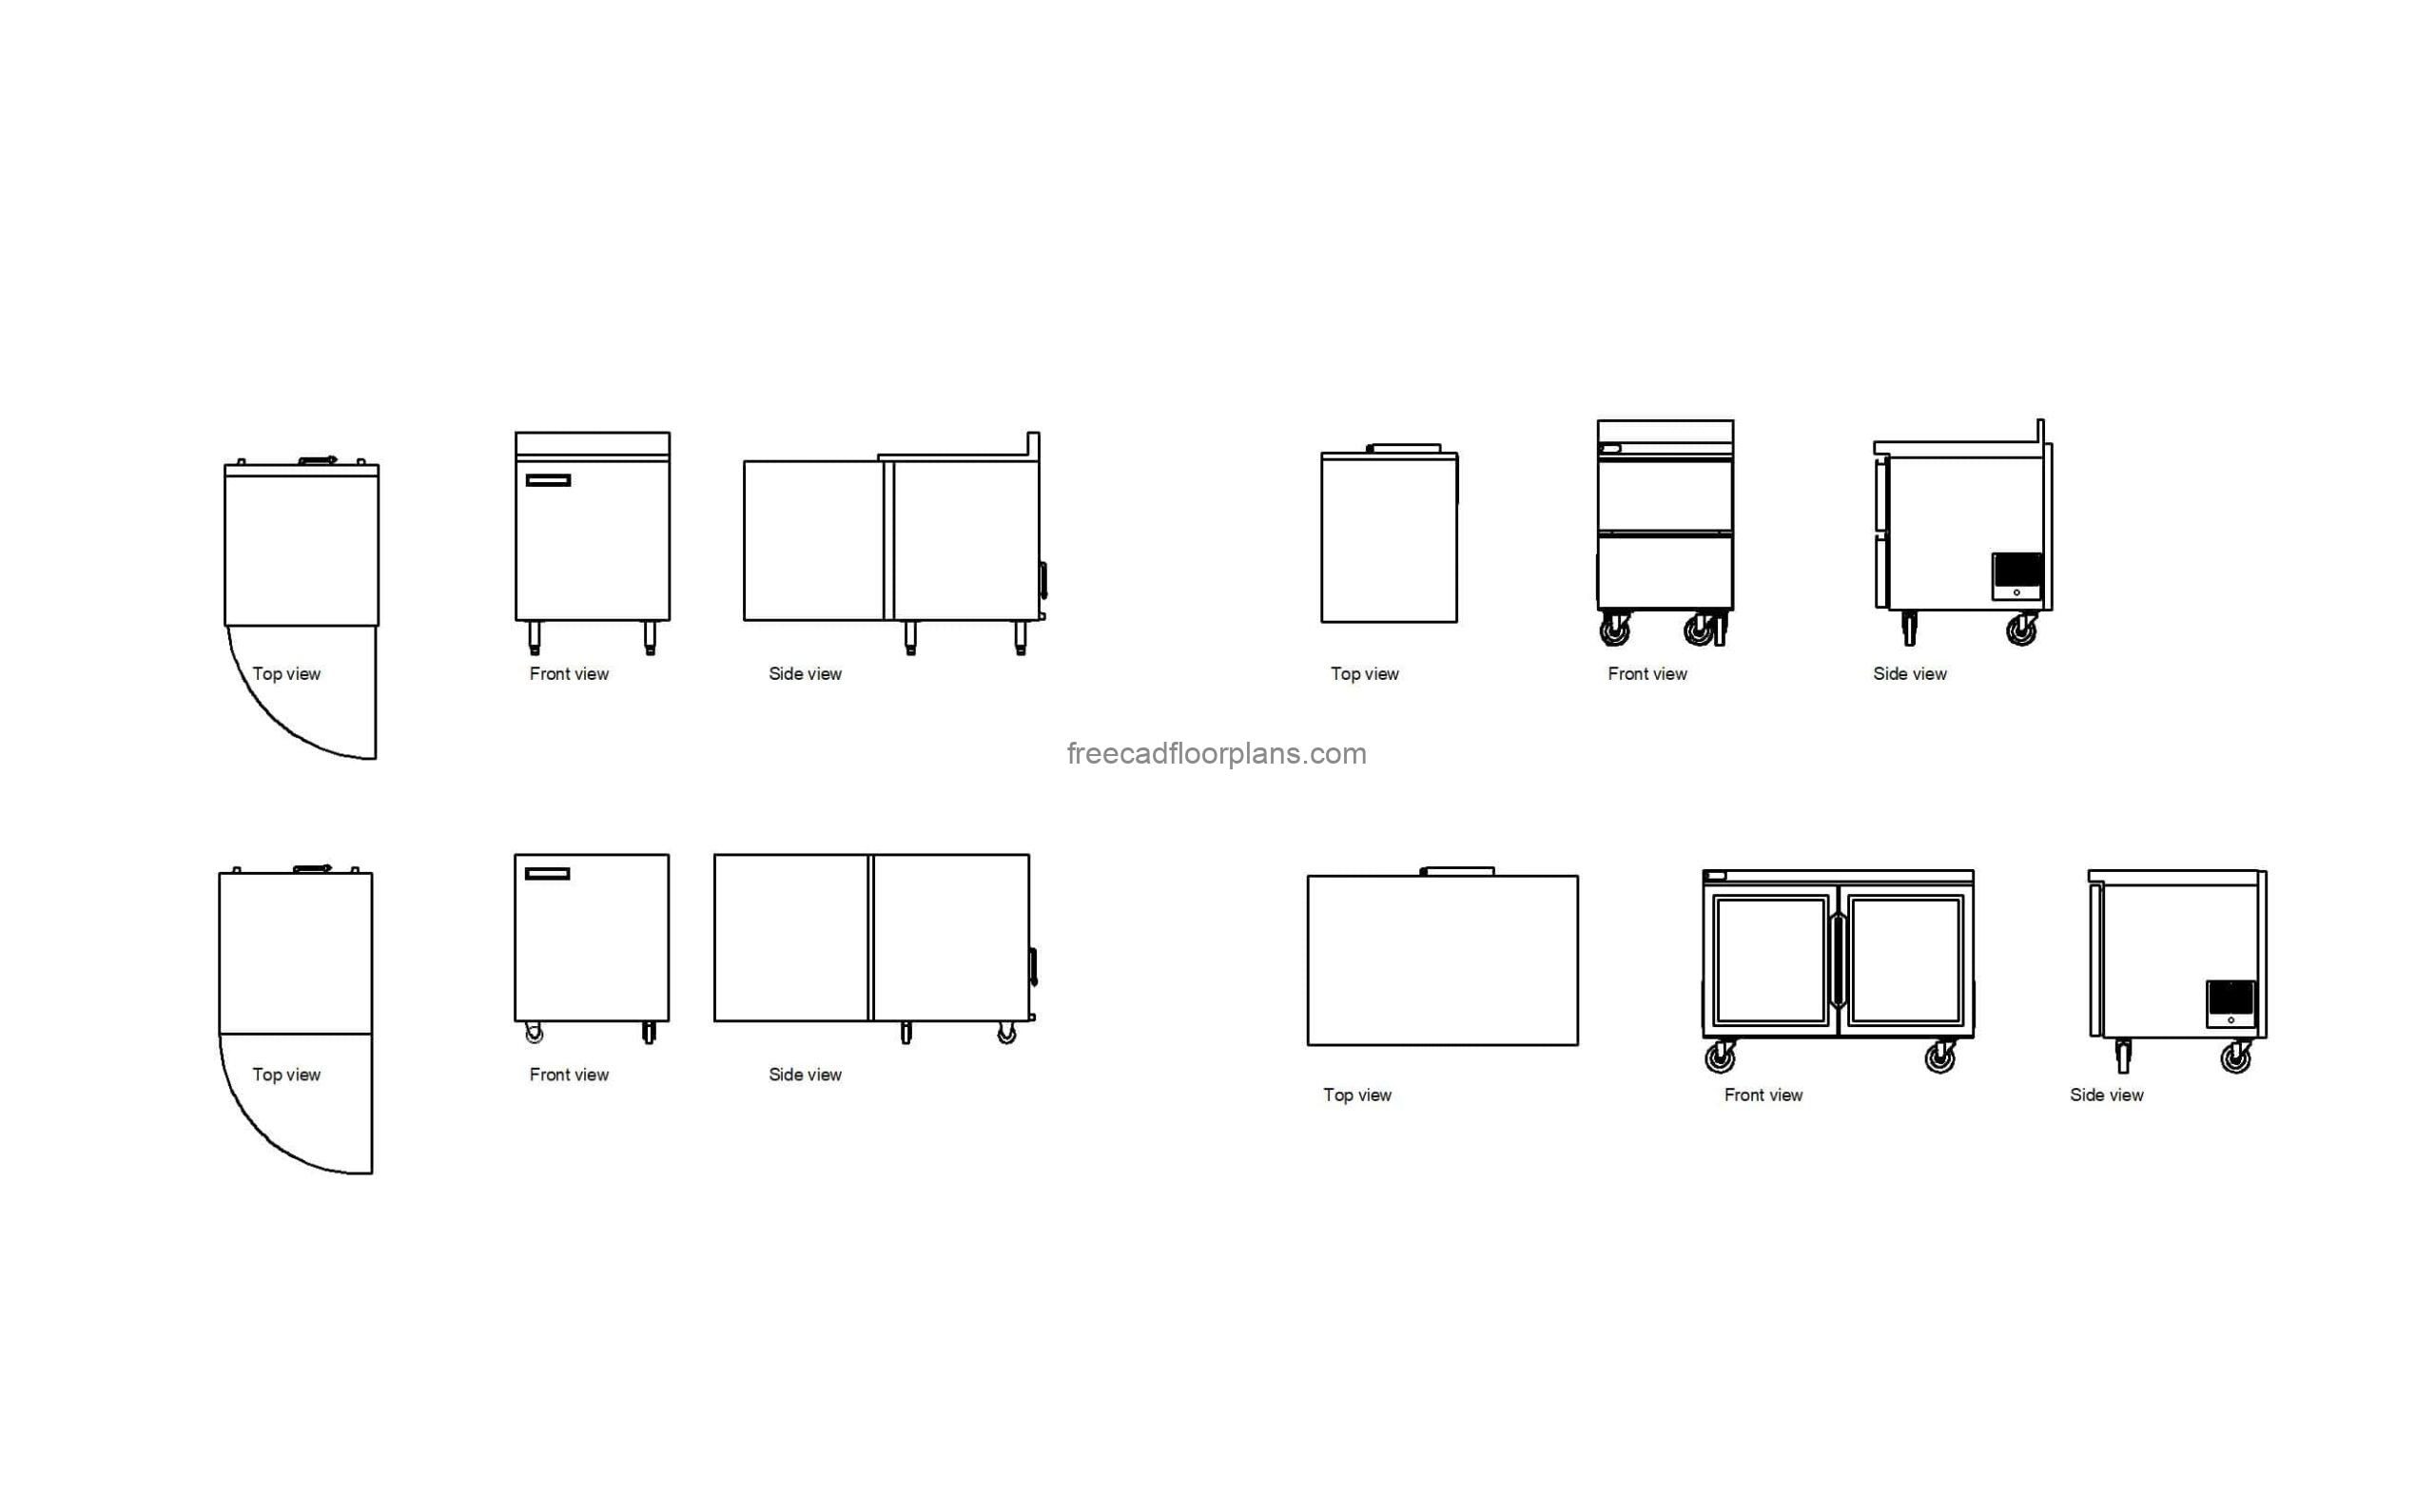 autocad drawing of different undercounter refrigeratos, plan and elevation 2d views, dwg file free for download